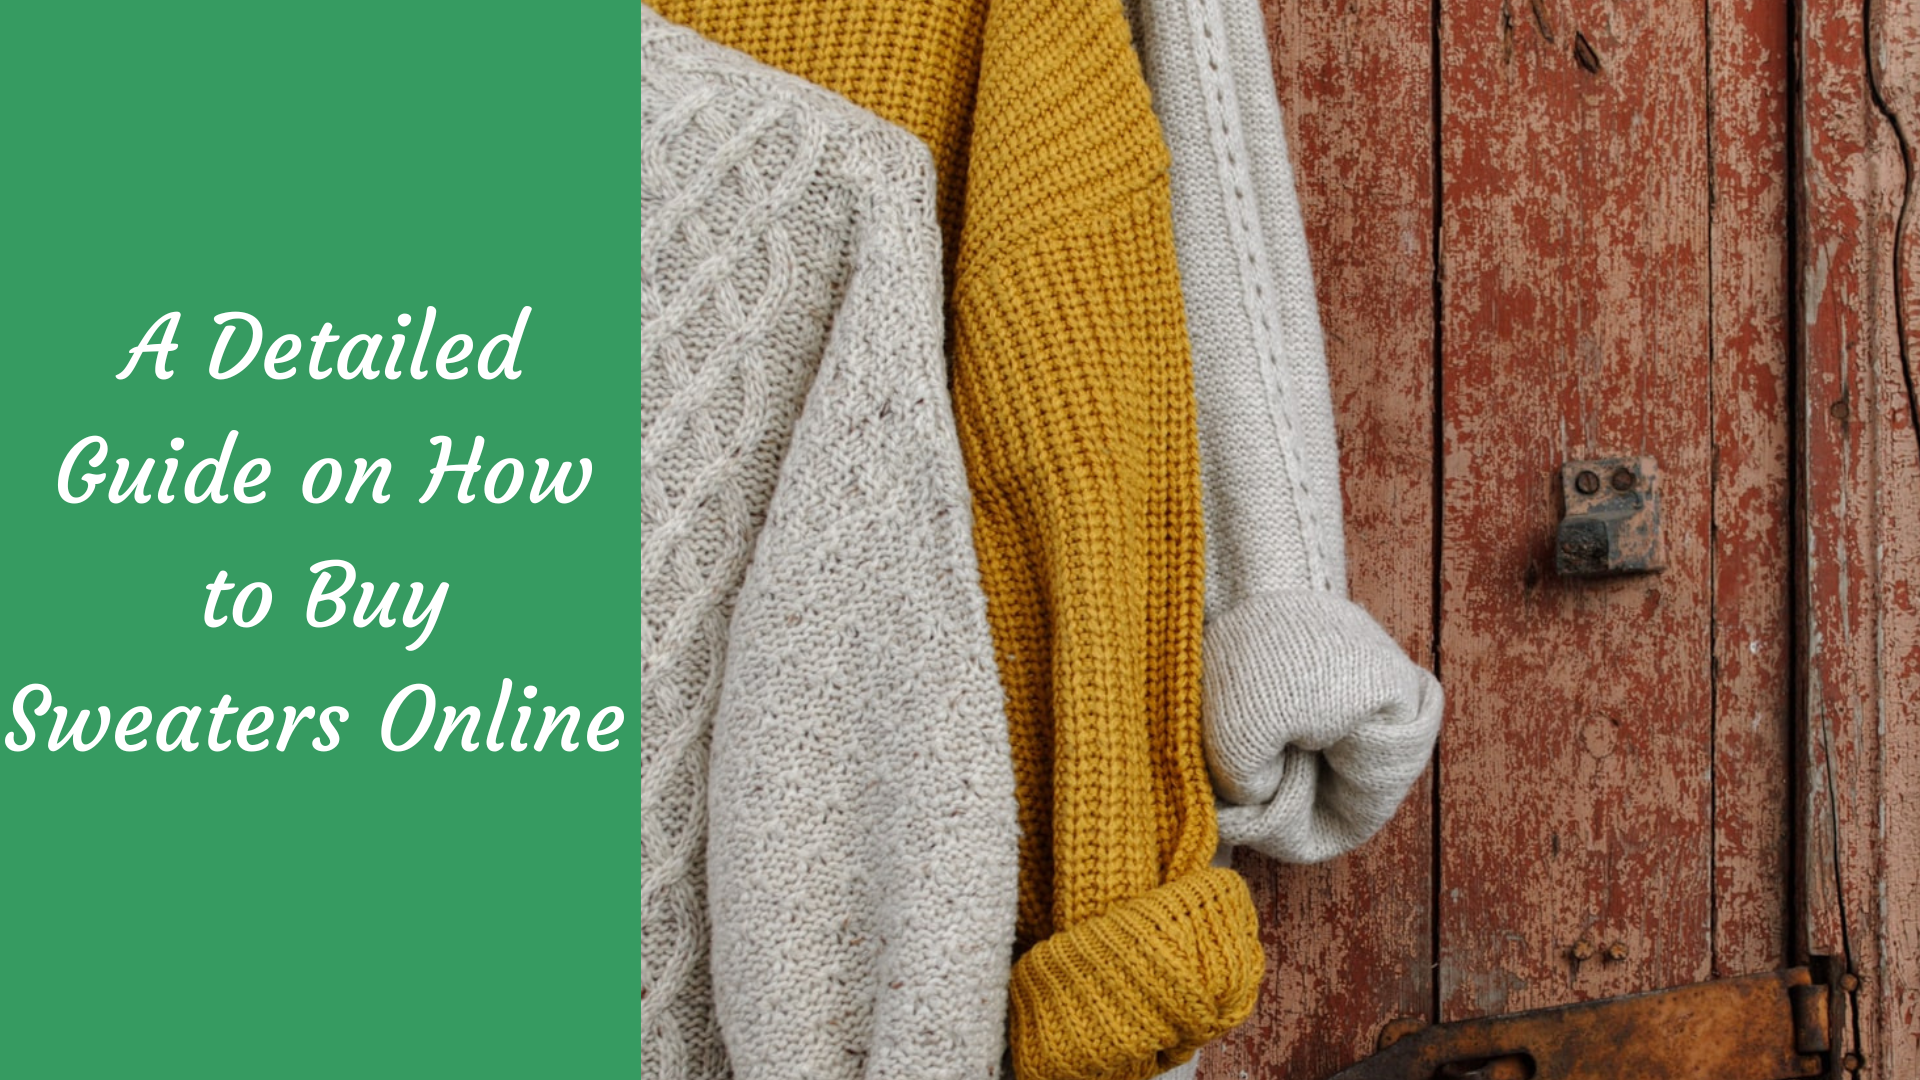 A Detailed Guide on How to Buy Sweaters Online - The Kosha Journal